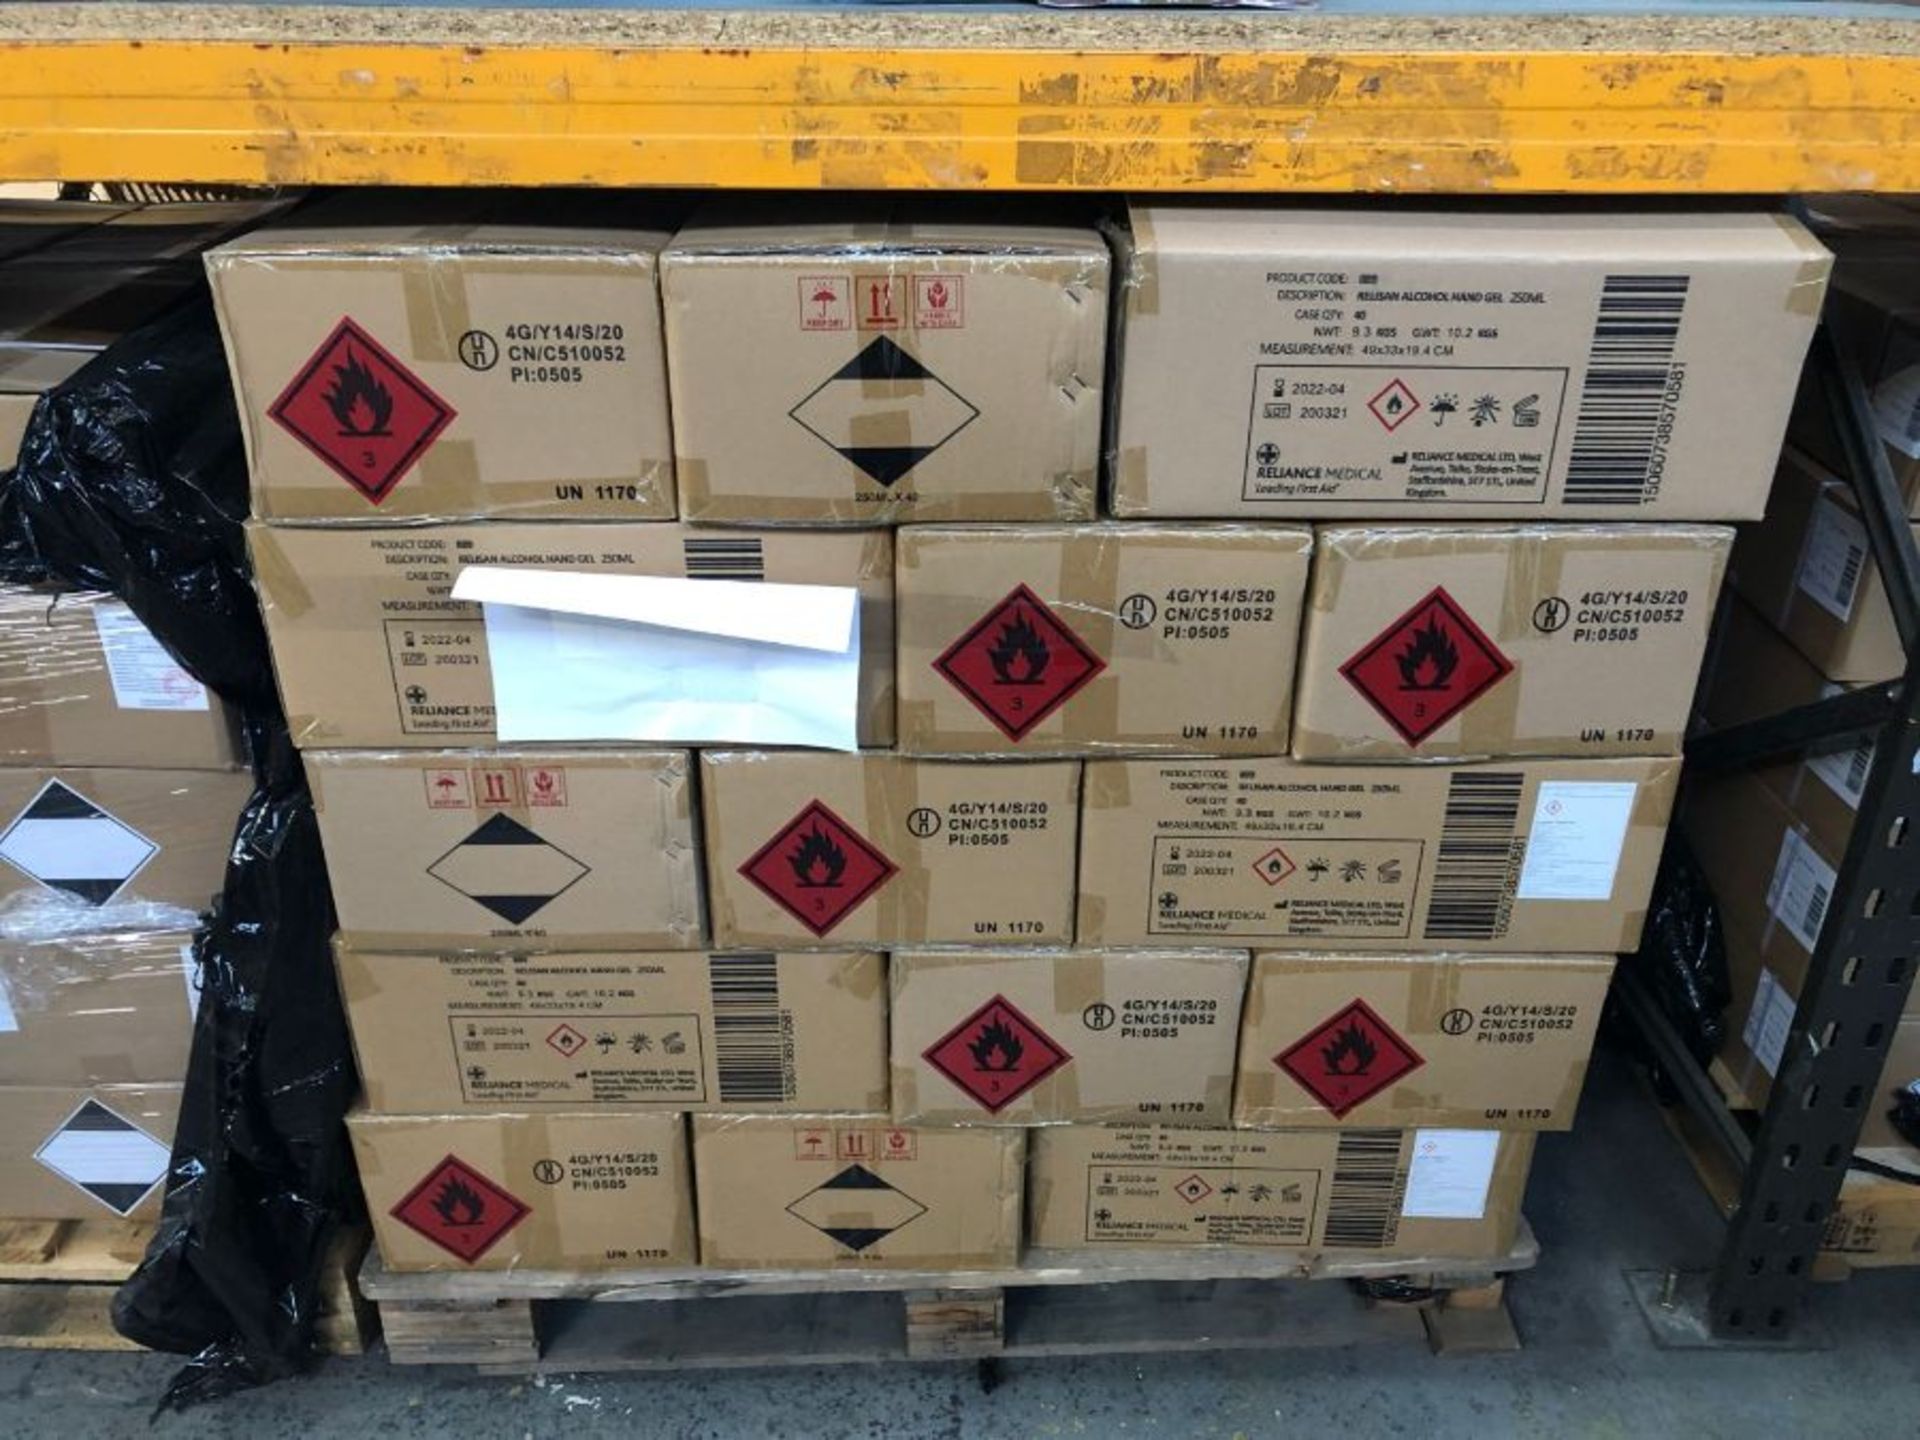 1 X BULK PALLET TO CONTAIN 35 X BOXES OF RELISAN ALCOHOL HAND GEL / 40 X 250ml BOTTLES PER BOX /